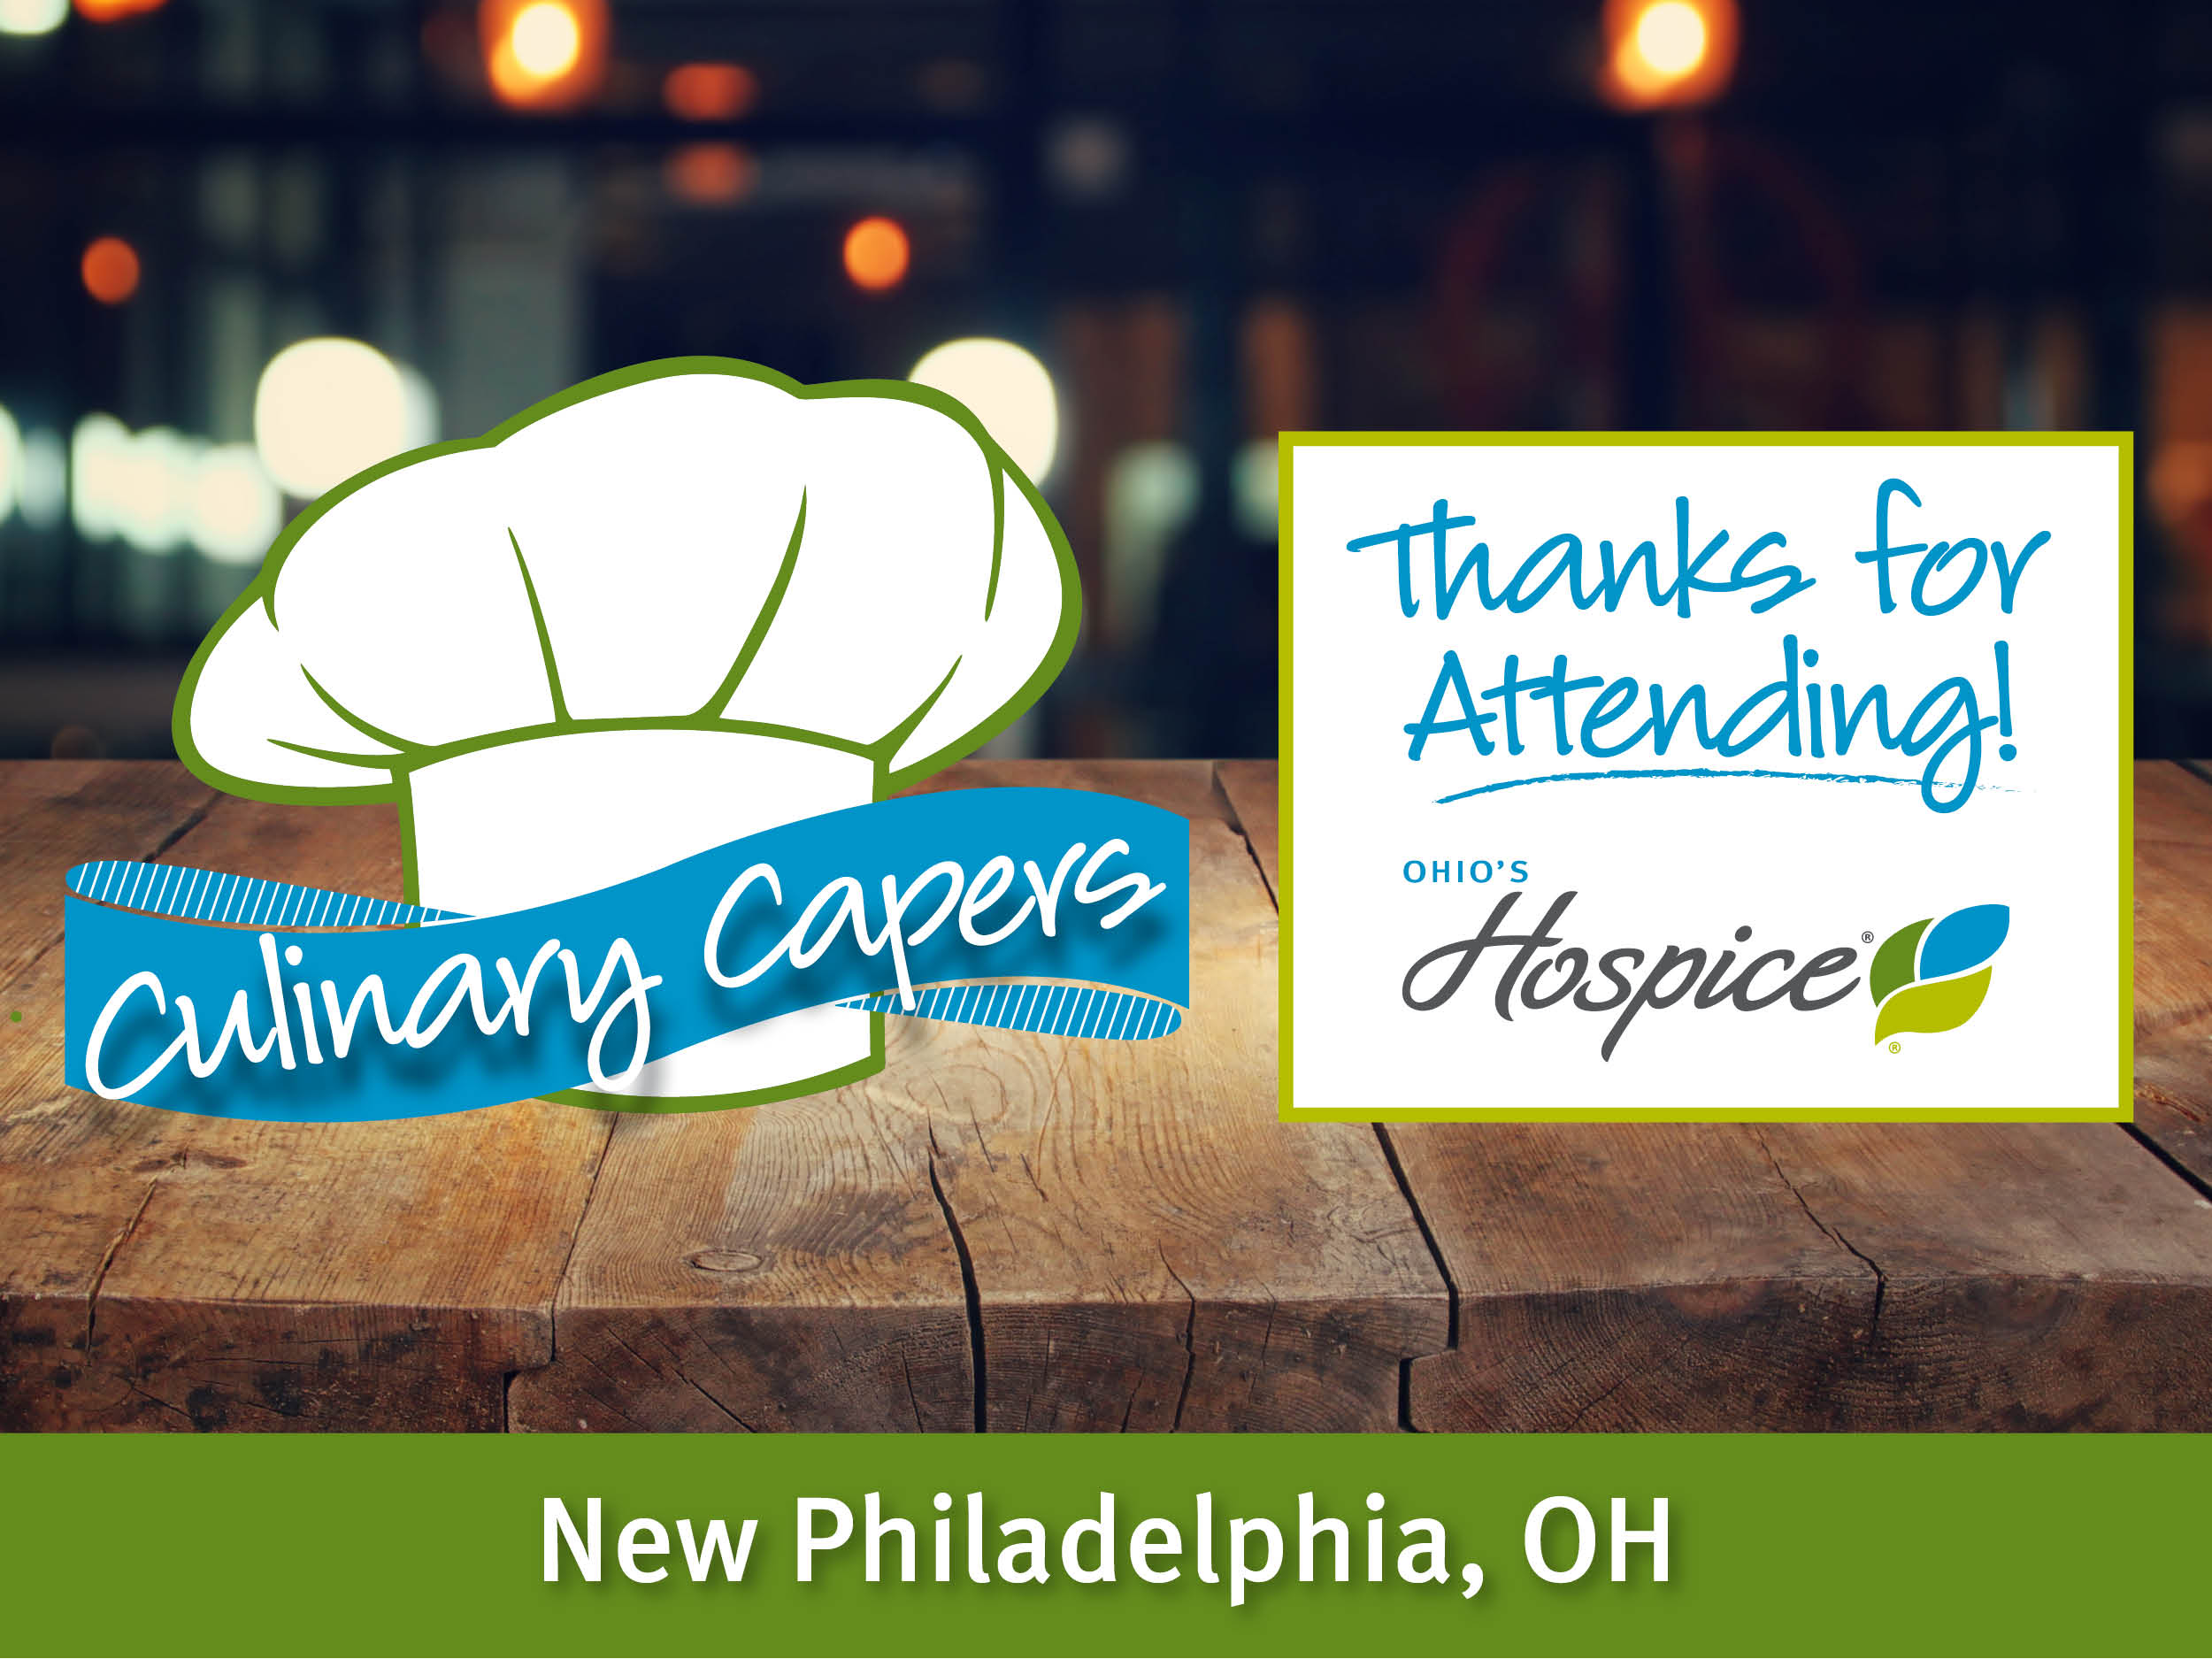 Thank you for attending Culinary Capers!